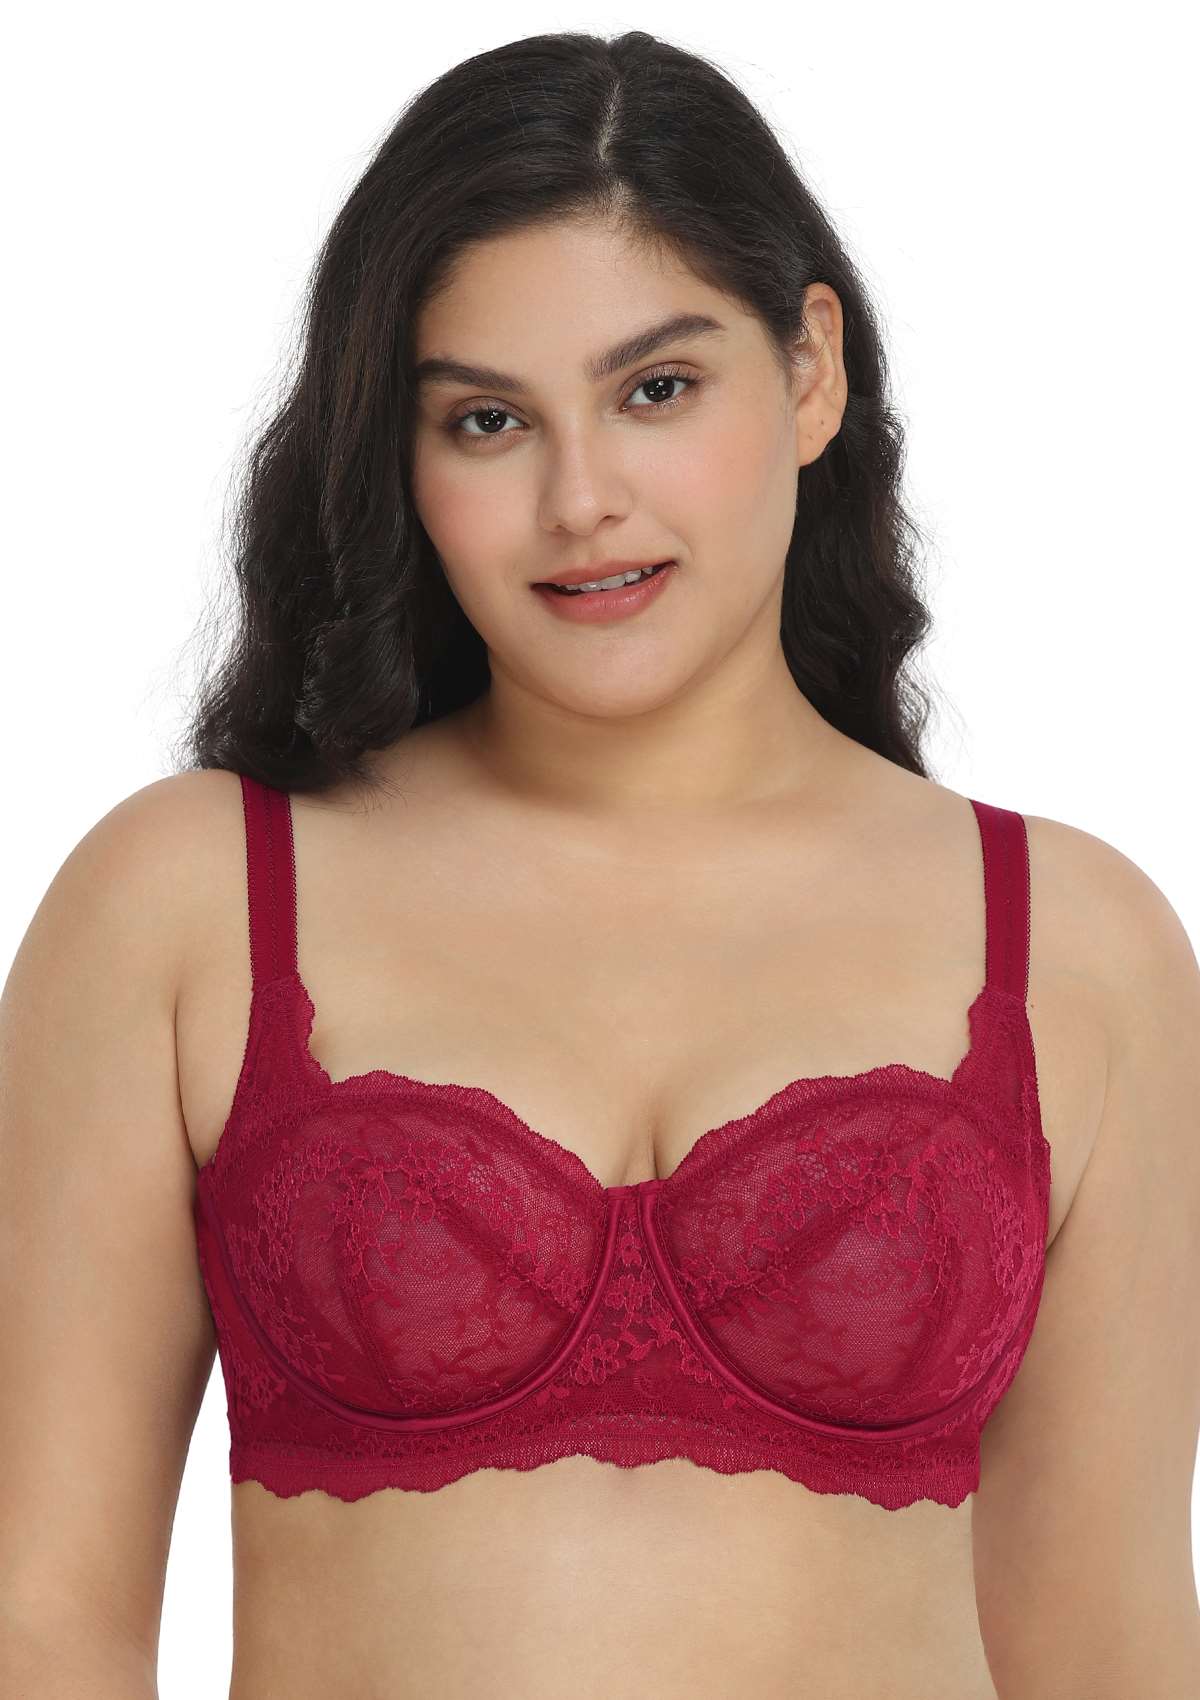 HSIA I Do Floral Lace Bridal Balconette Beautiful Bra For Special Day - Burgundy / 38 / C